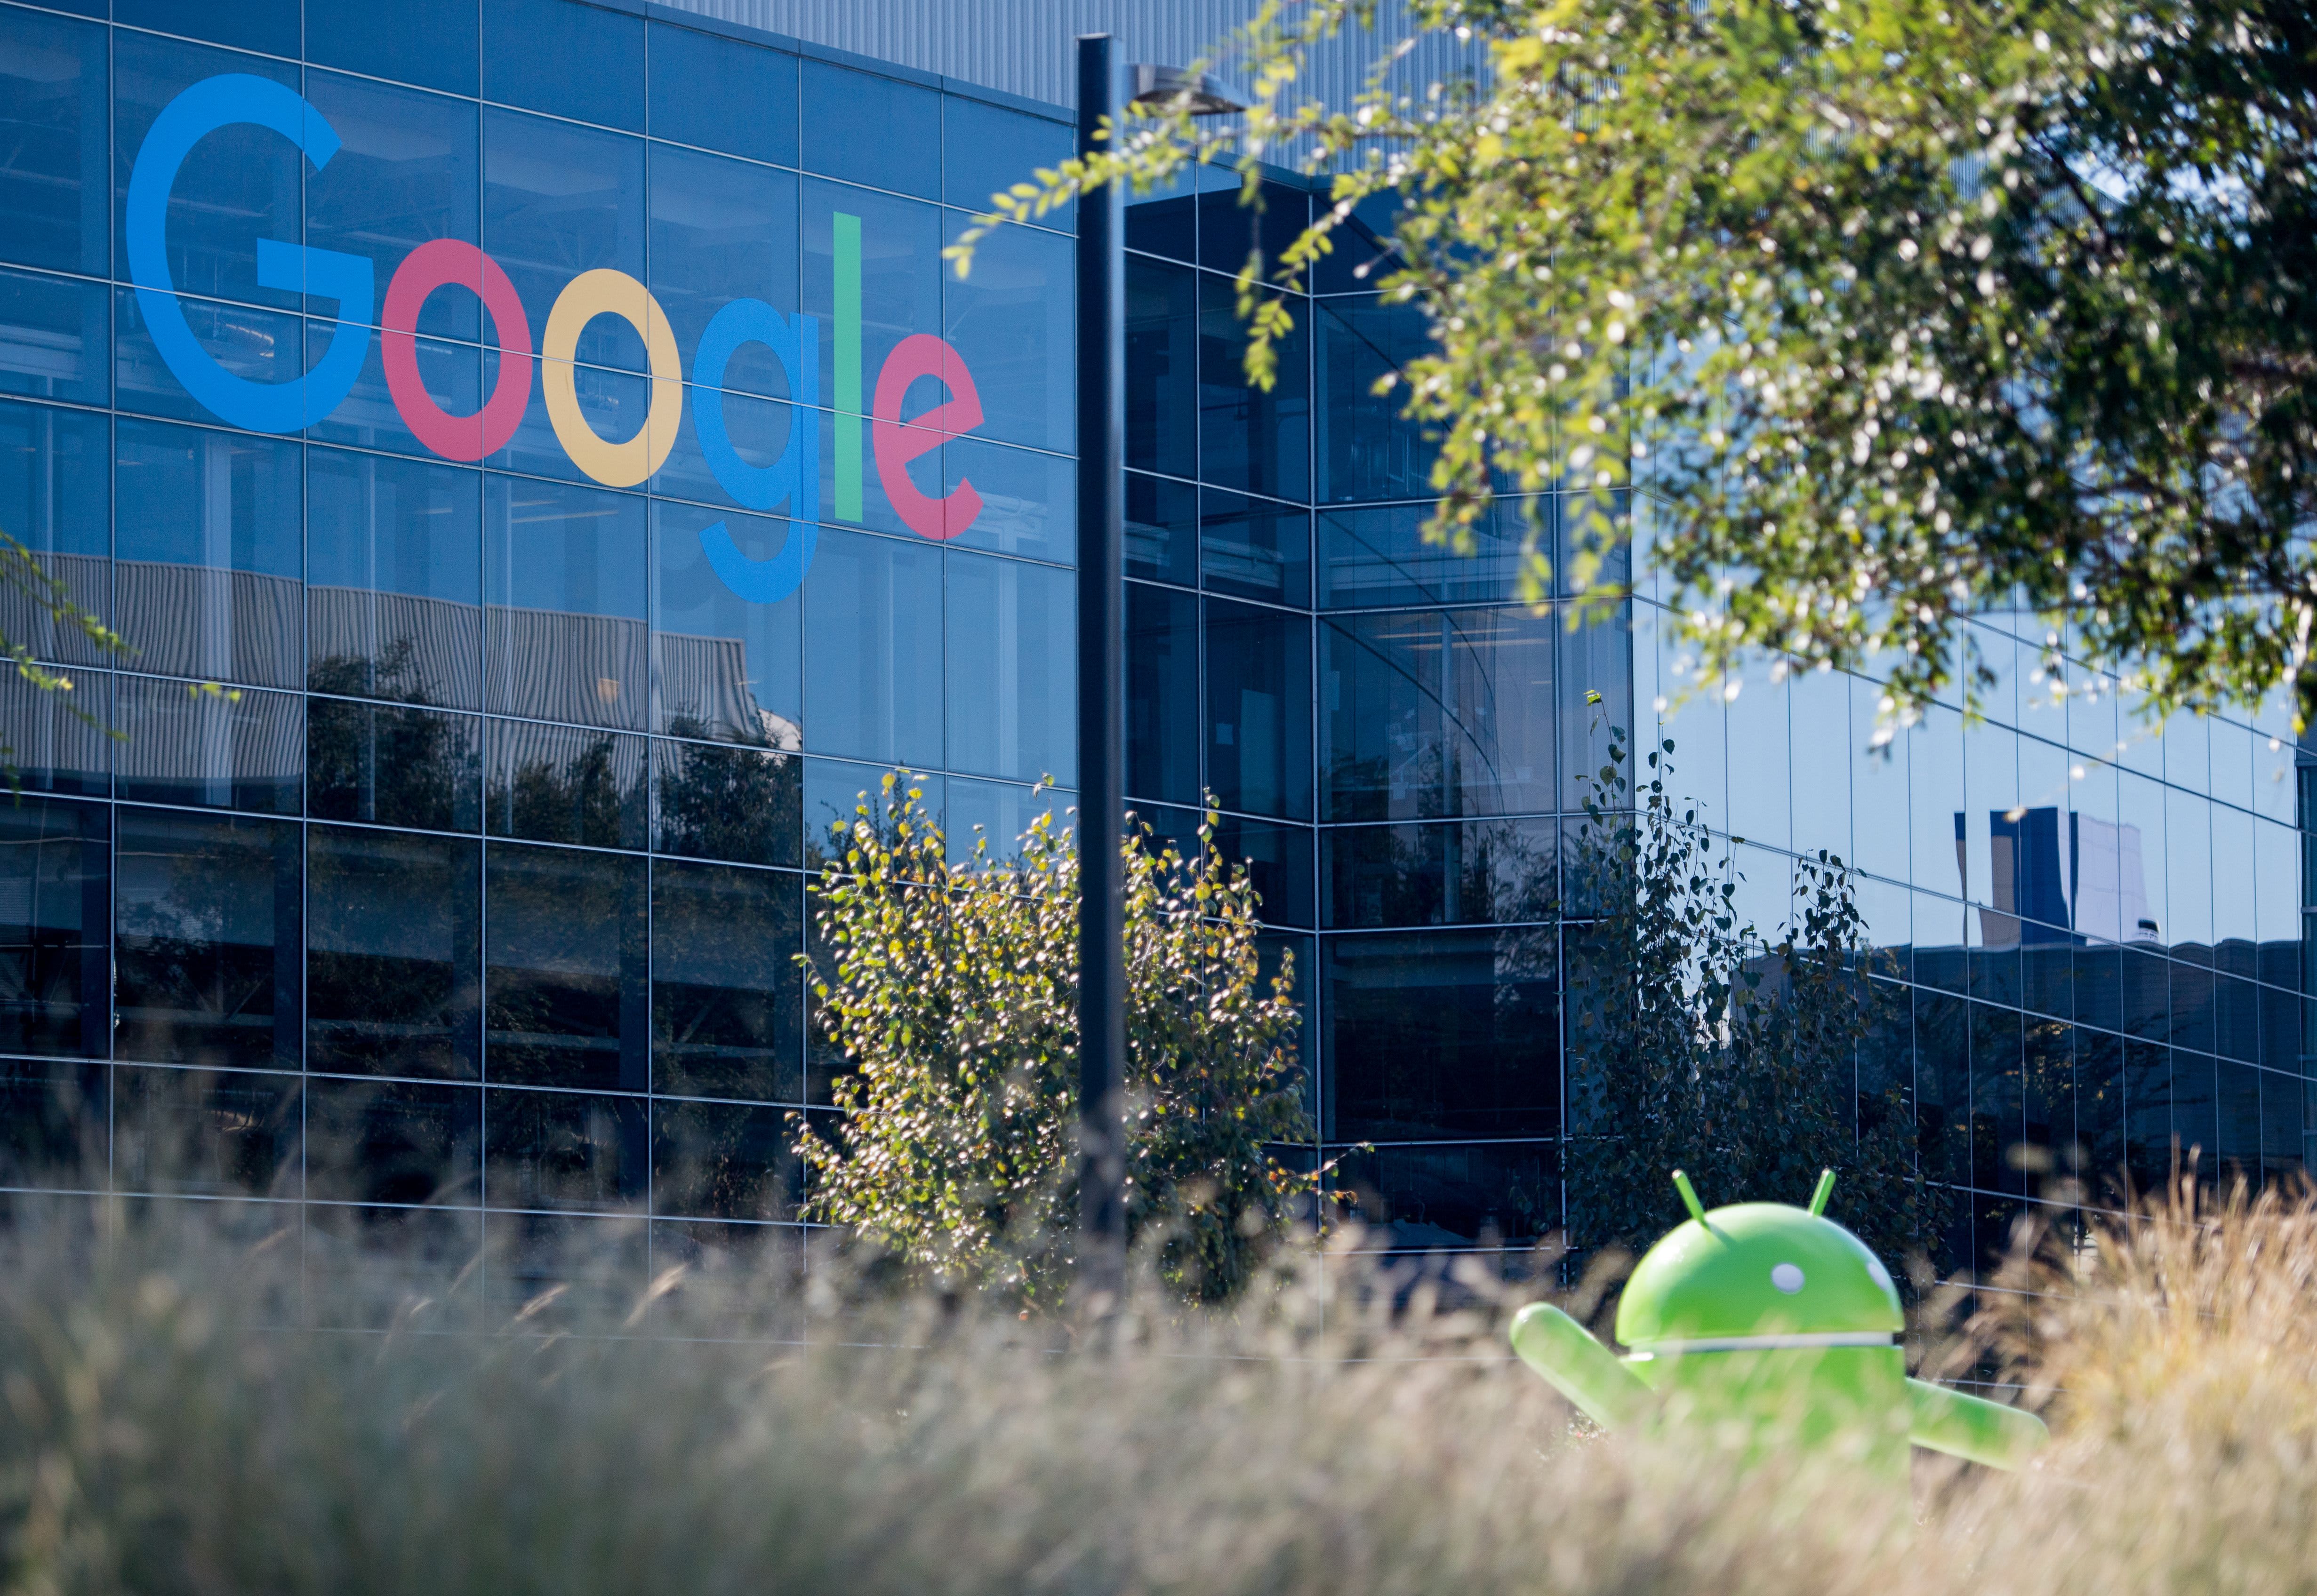 Google tells employees in Bay Area and other U.S. locations to return to offices in April